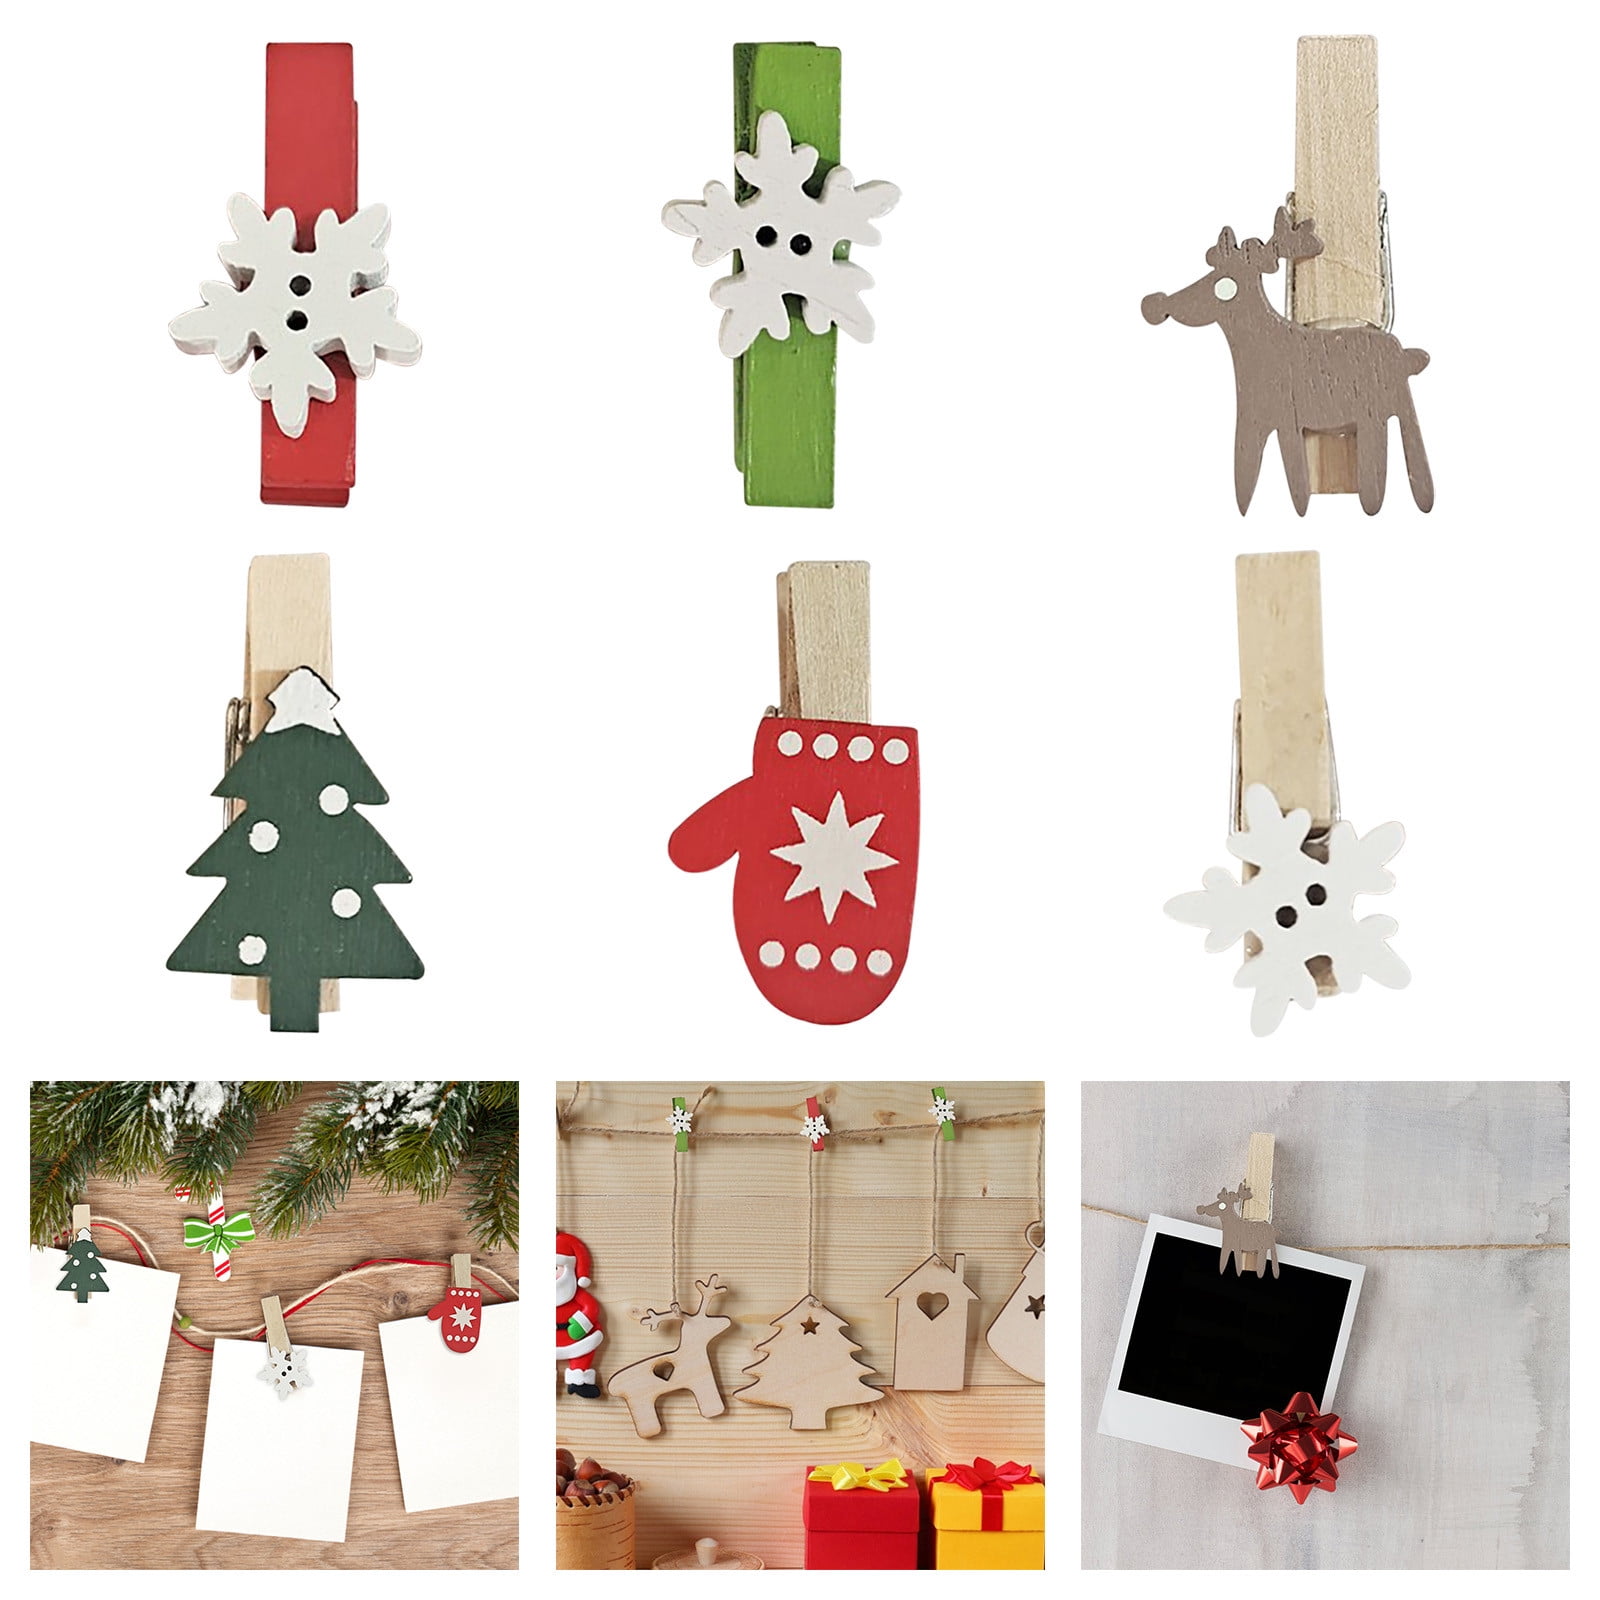 3 Christmas Wooden Mini Pegs Clips Xmas Art Craft Cards Photo Holder Decorations 